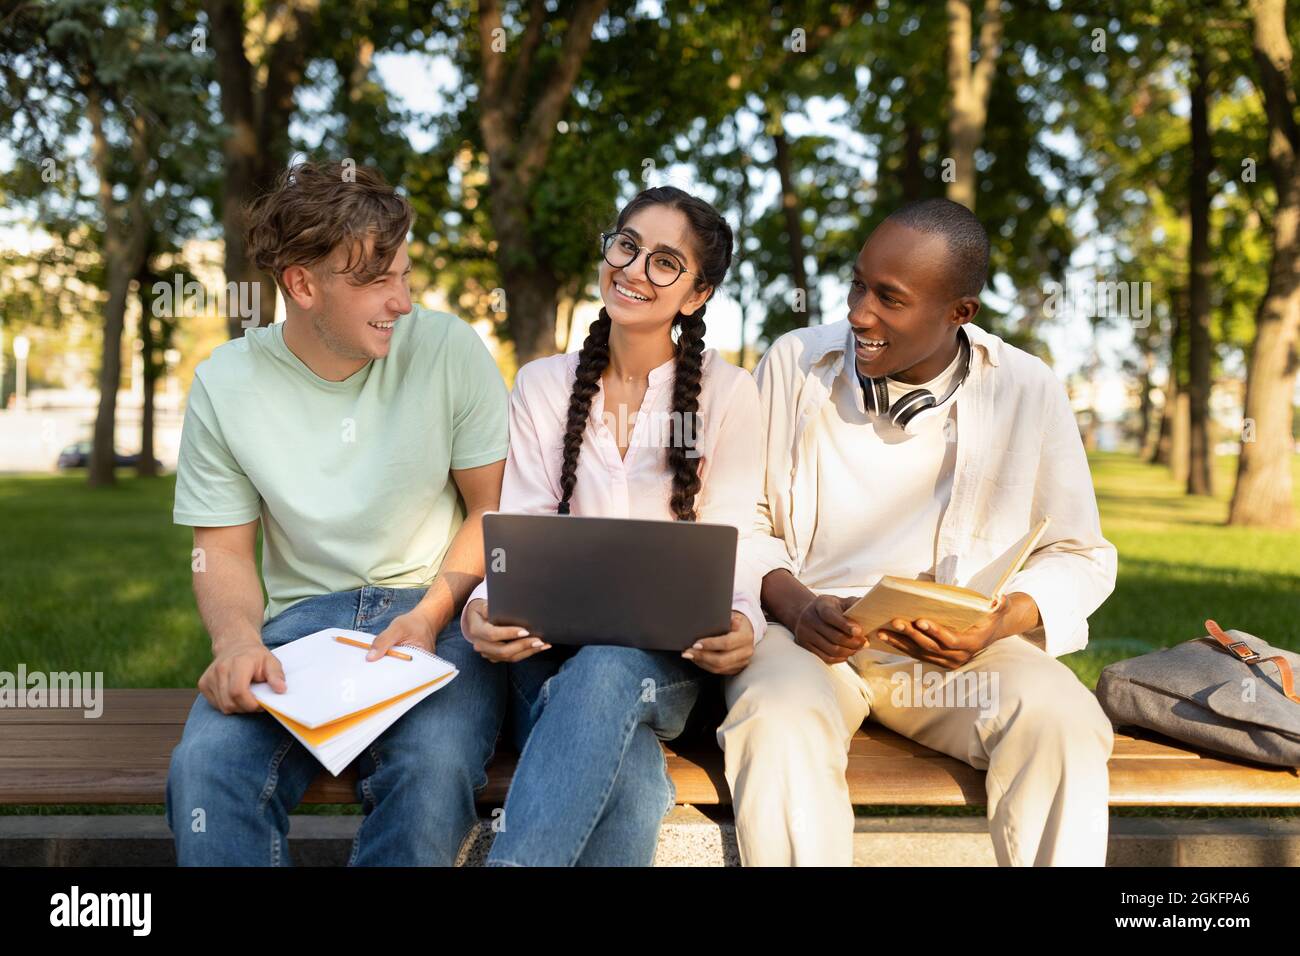 Diverse students friends learning sitting on bench, using laptop outdoors in university campus Stock Photo